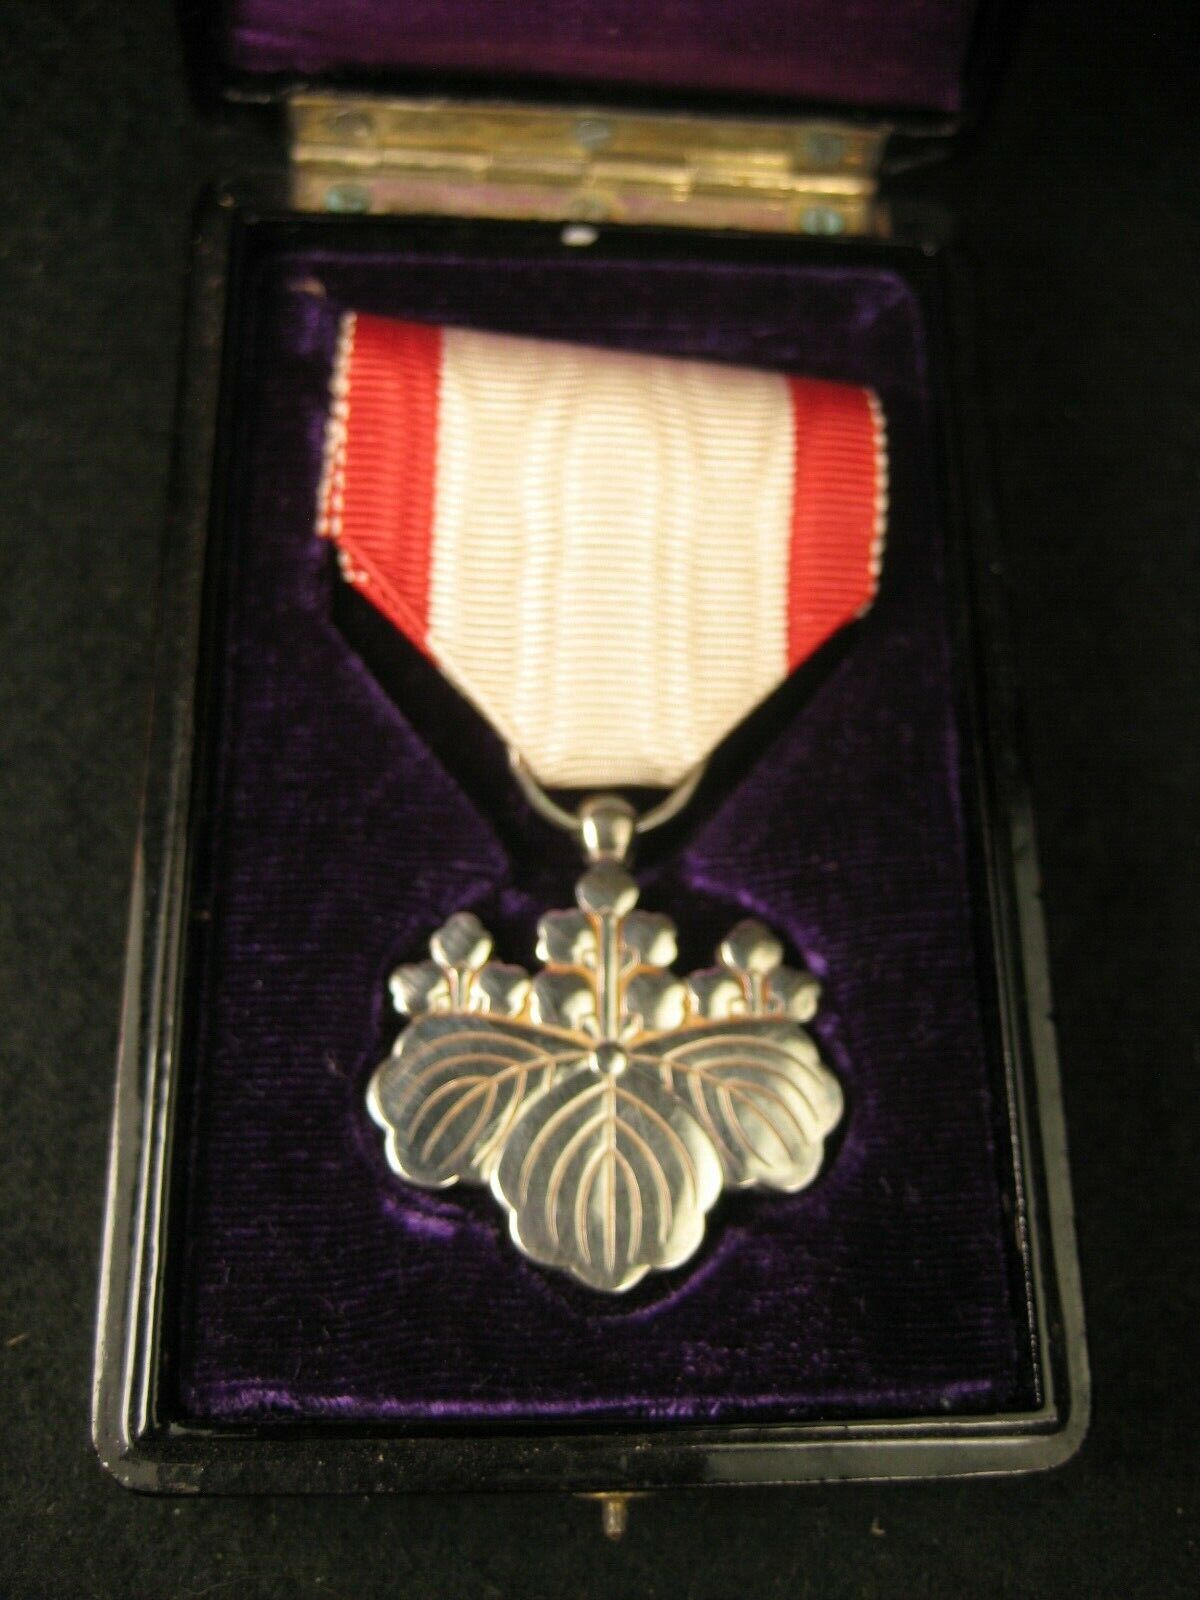 Antique Japanese Ww2 War Sterling Silver Medal Cased Order Of The Rising Sun